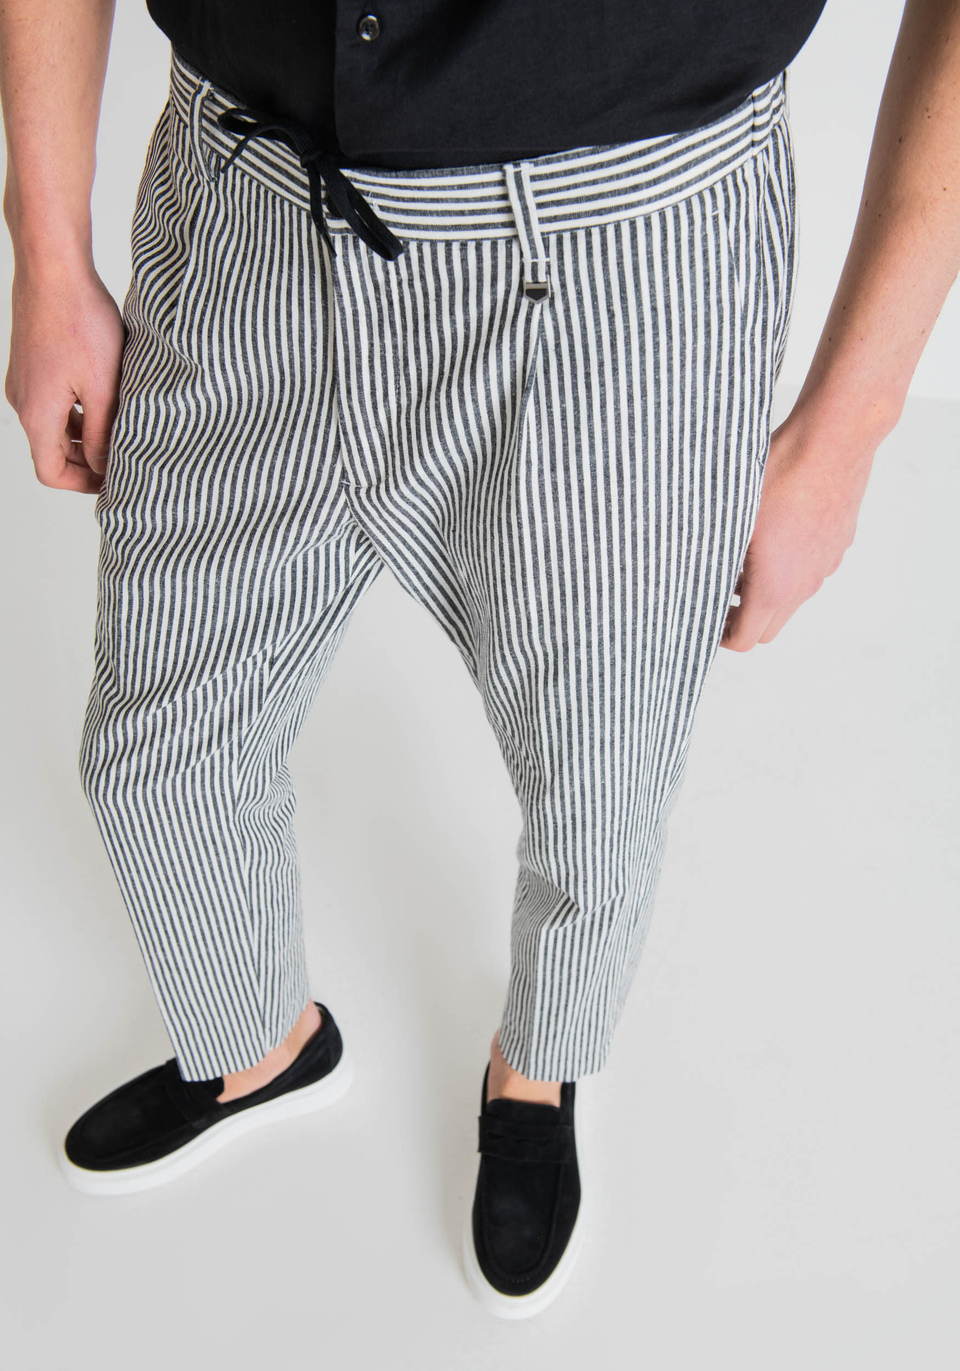 “GUSTAF” CARROT-FIT TROUSERS IN LINEN BLEND WITH STRIPED PRINT - Antony Morato Online Shop